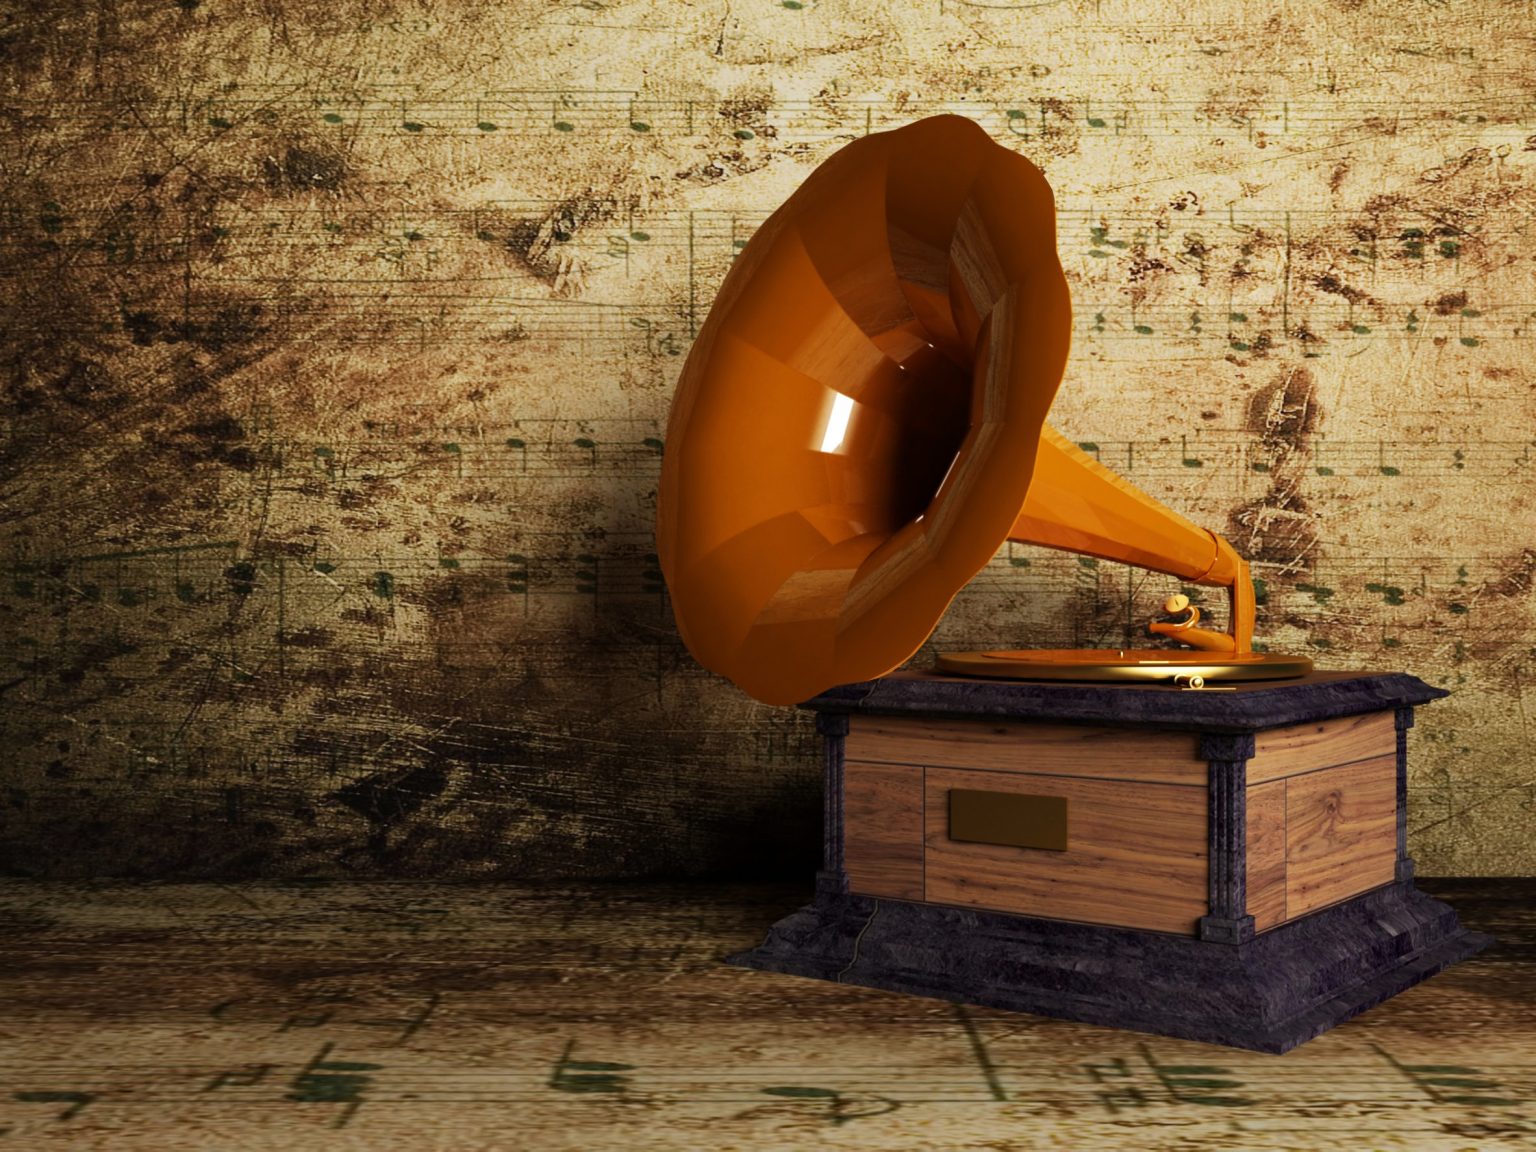 beautiful old gramophone on the interesting background, rendering